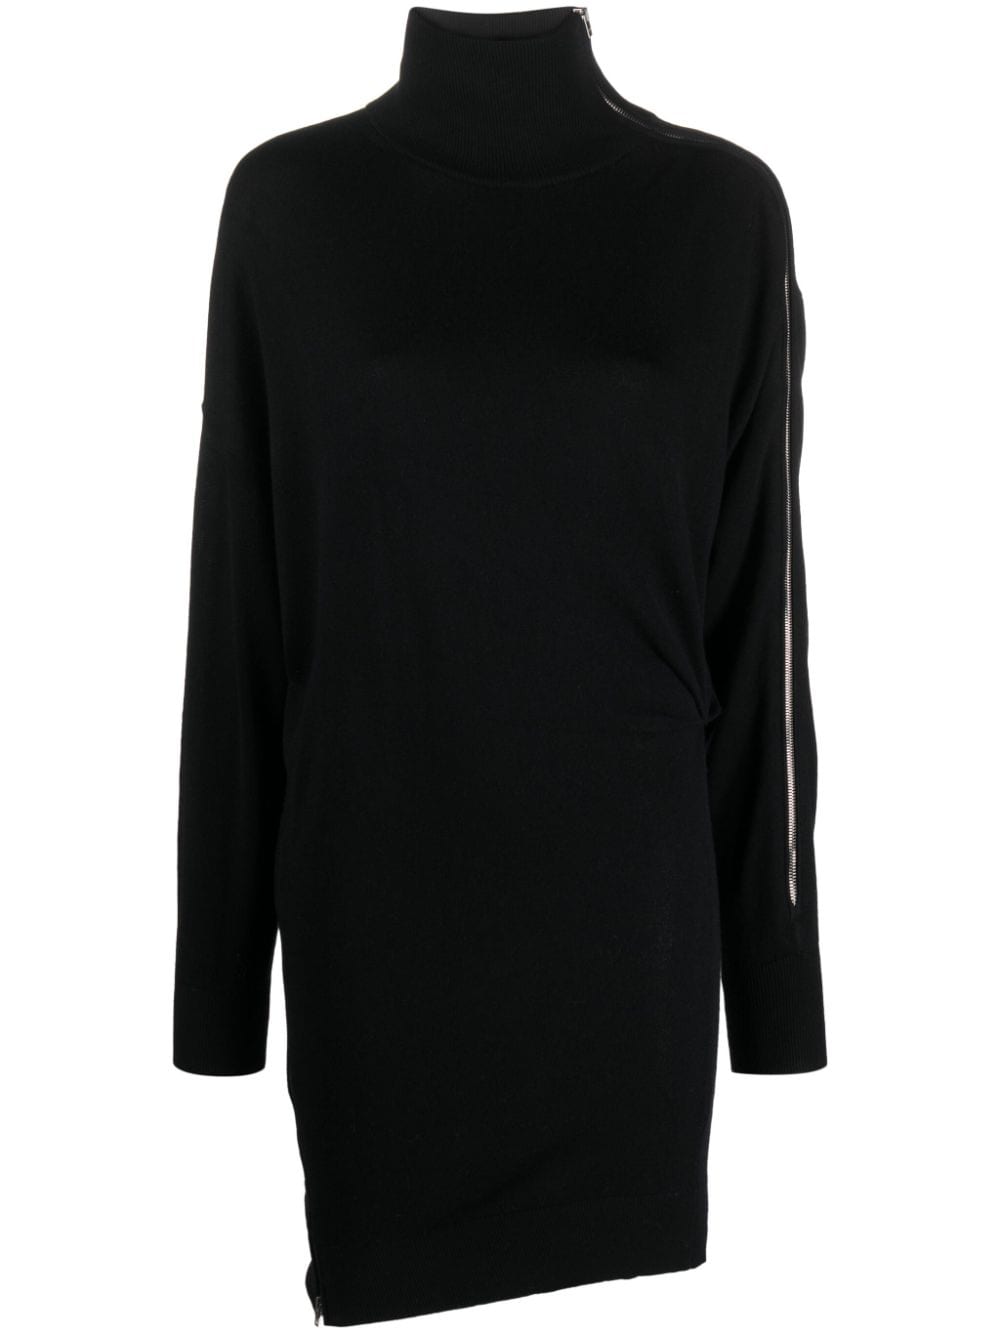 ISABEL MARANT Black Asymmetrical Knit Dress for Women - FW23 Collection